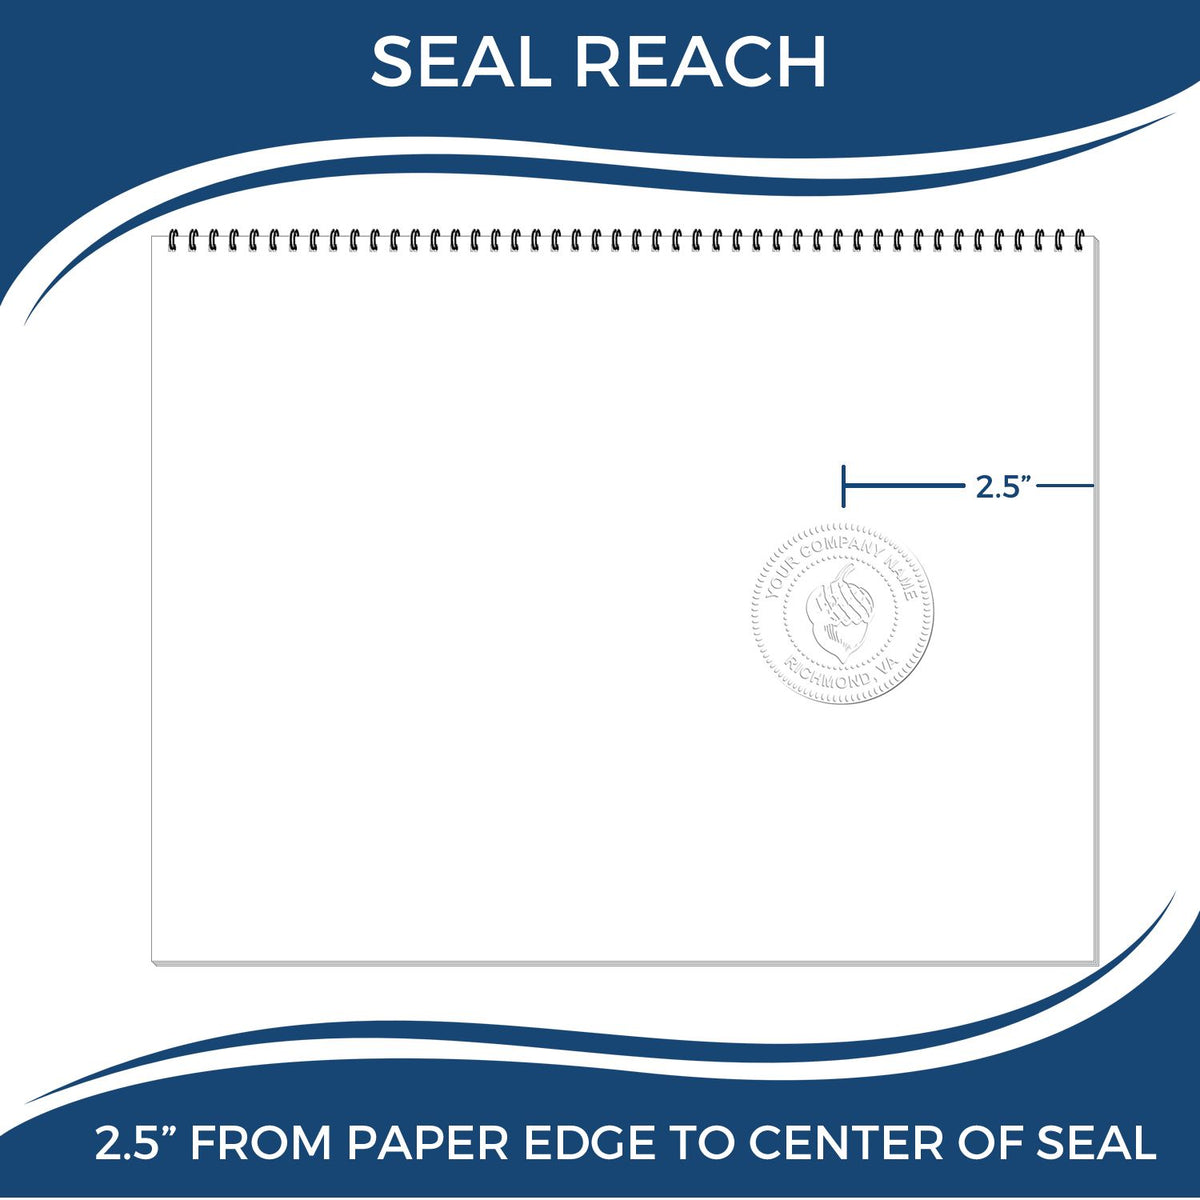 An infographic showing the seal reach which is represented by a ruler and a miniature seal image of the Heavy Duty Cast Iron Ohio Engineer Seal Embosser